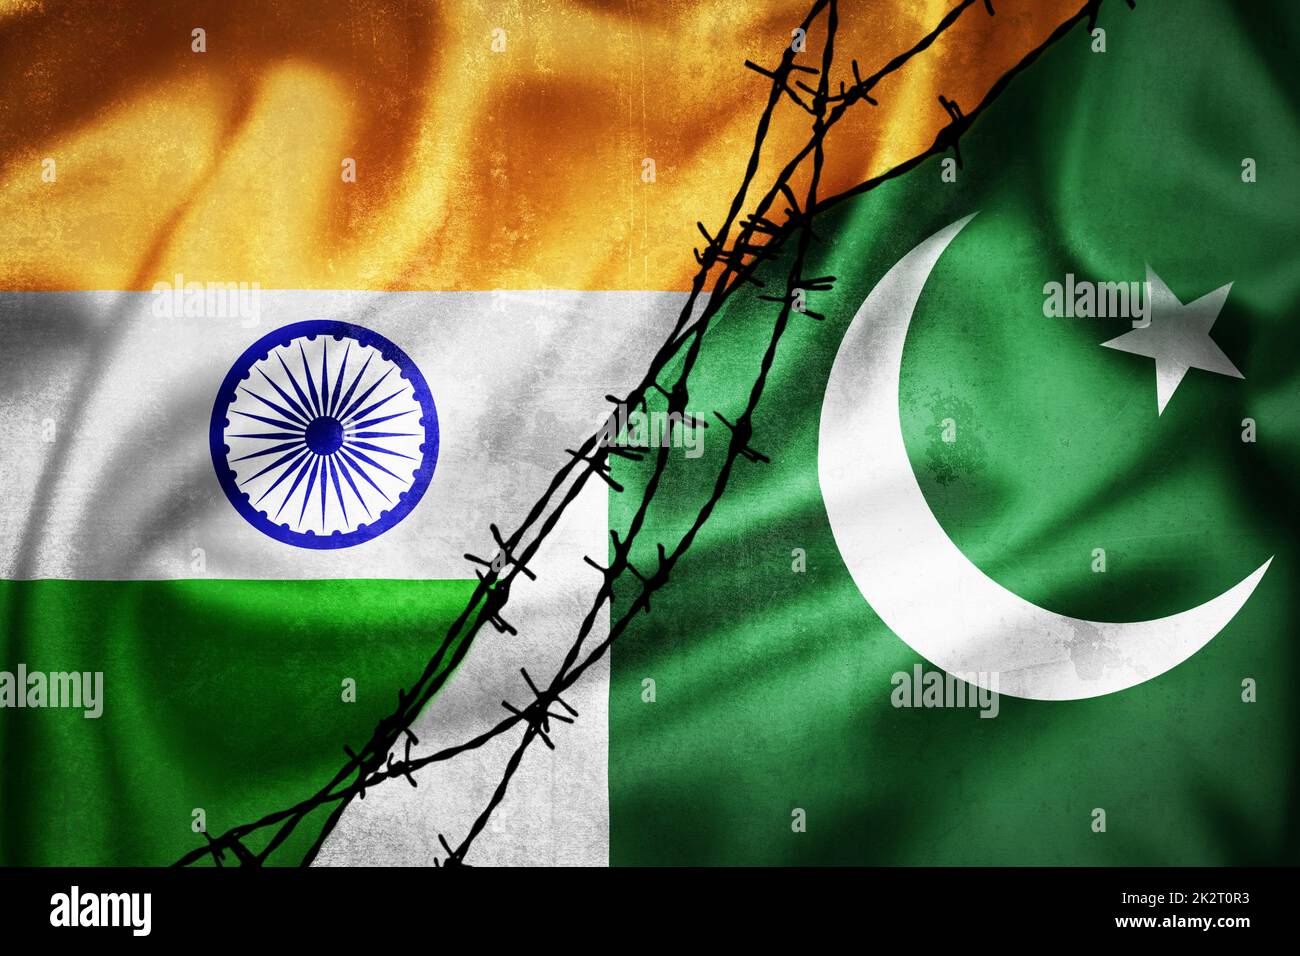 Grunge flags of India and Pakistan divided by barb wire illustration Stock Photo